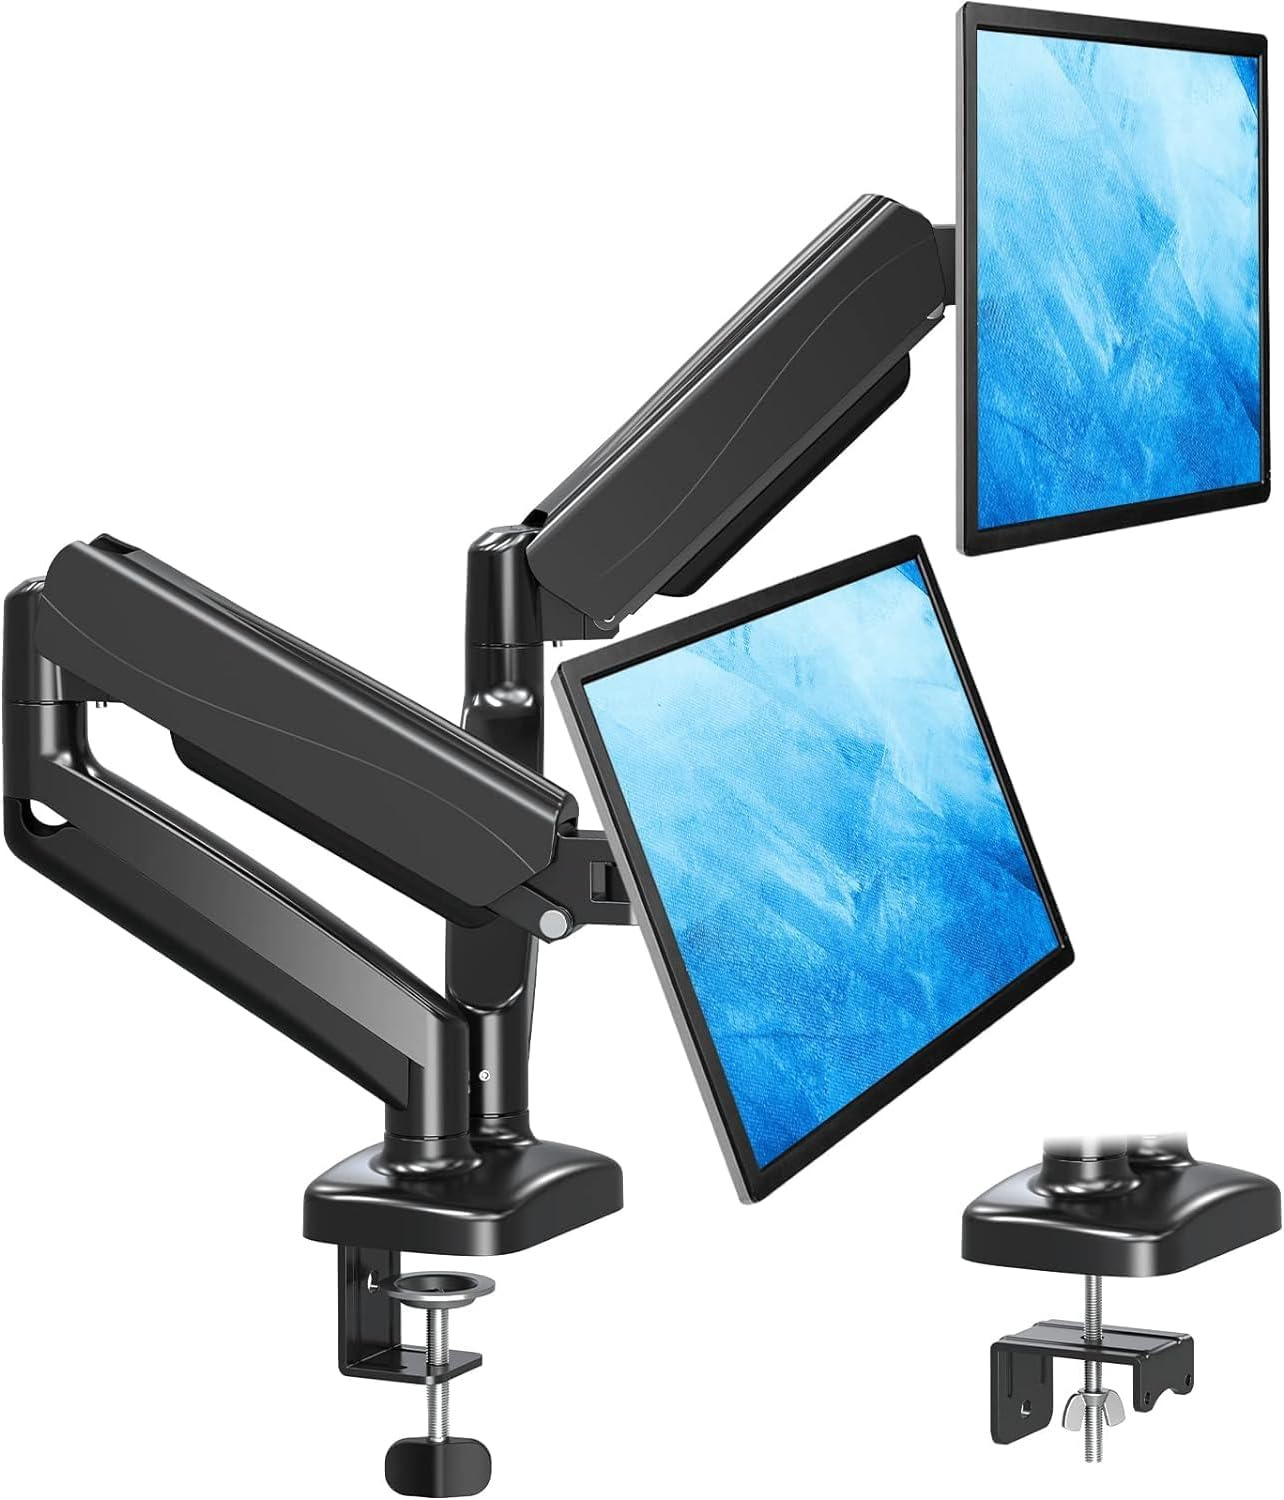 Dual Monitor Stand for Desk, Adjustable Gas Spring Double Monitor Mount Holds 4.